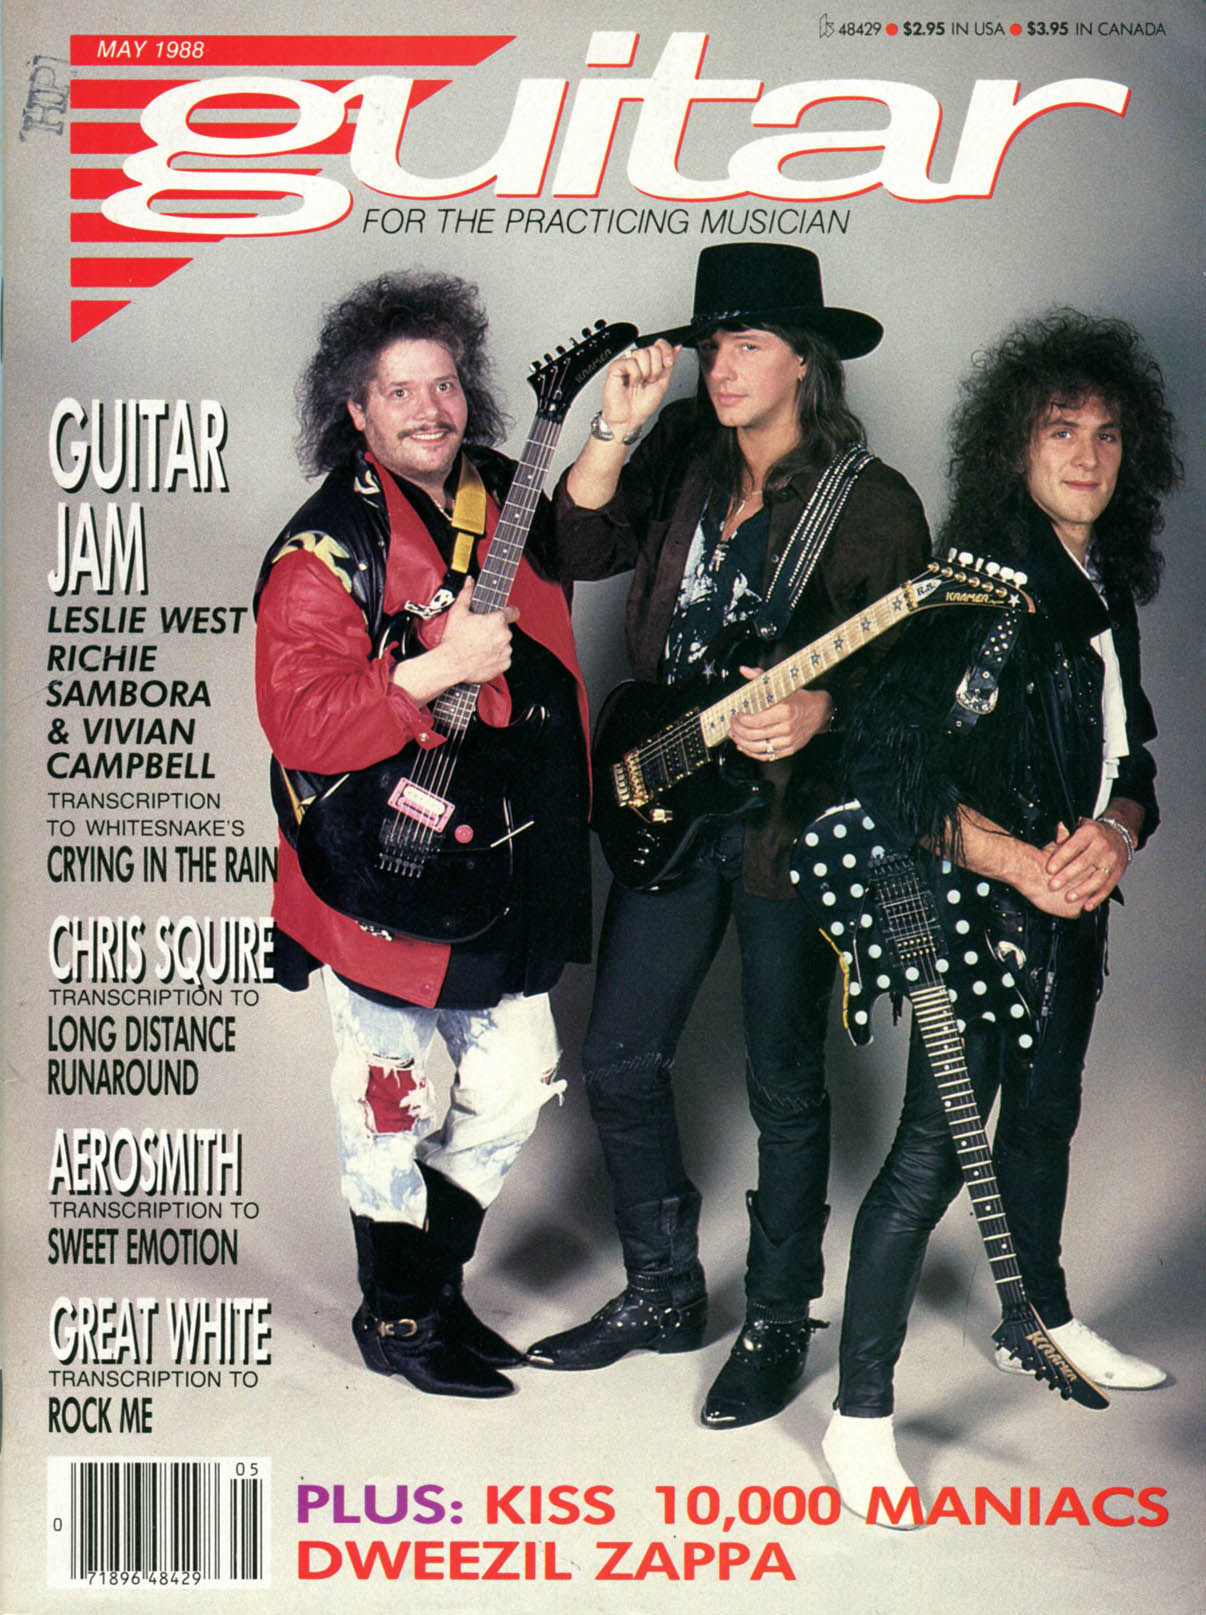 Jörg Planer on Twitter: "The David Coverdale & Whitesnake Magazine Cover  Collection May 1988 - A Guitar cover with Vivian Campbell  https://t.co/WadUVQIVPL" / Twitter